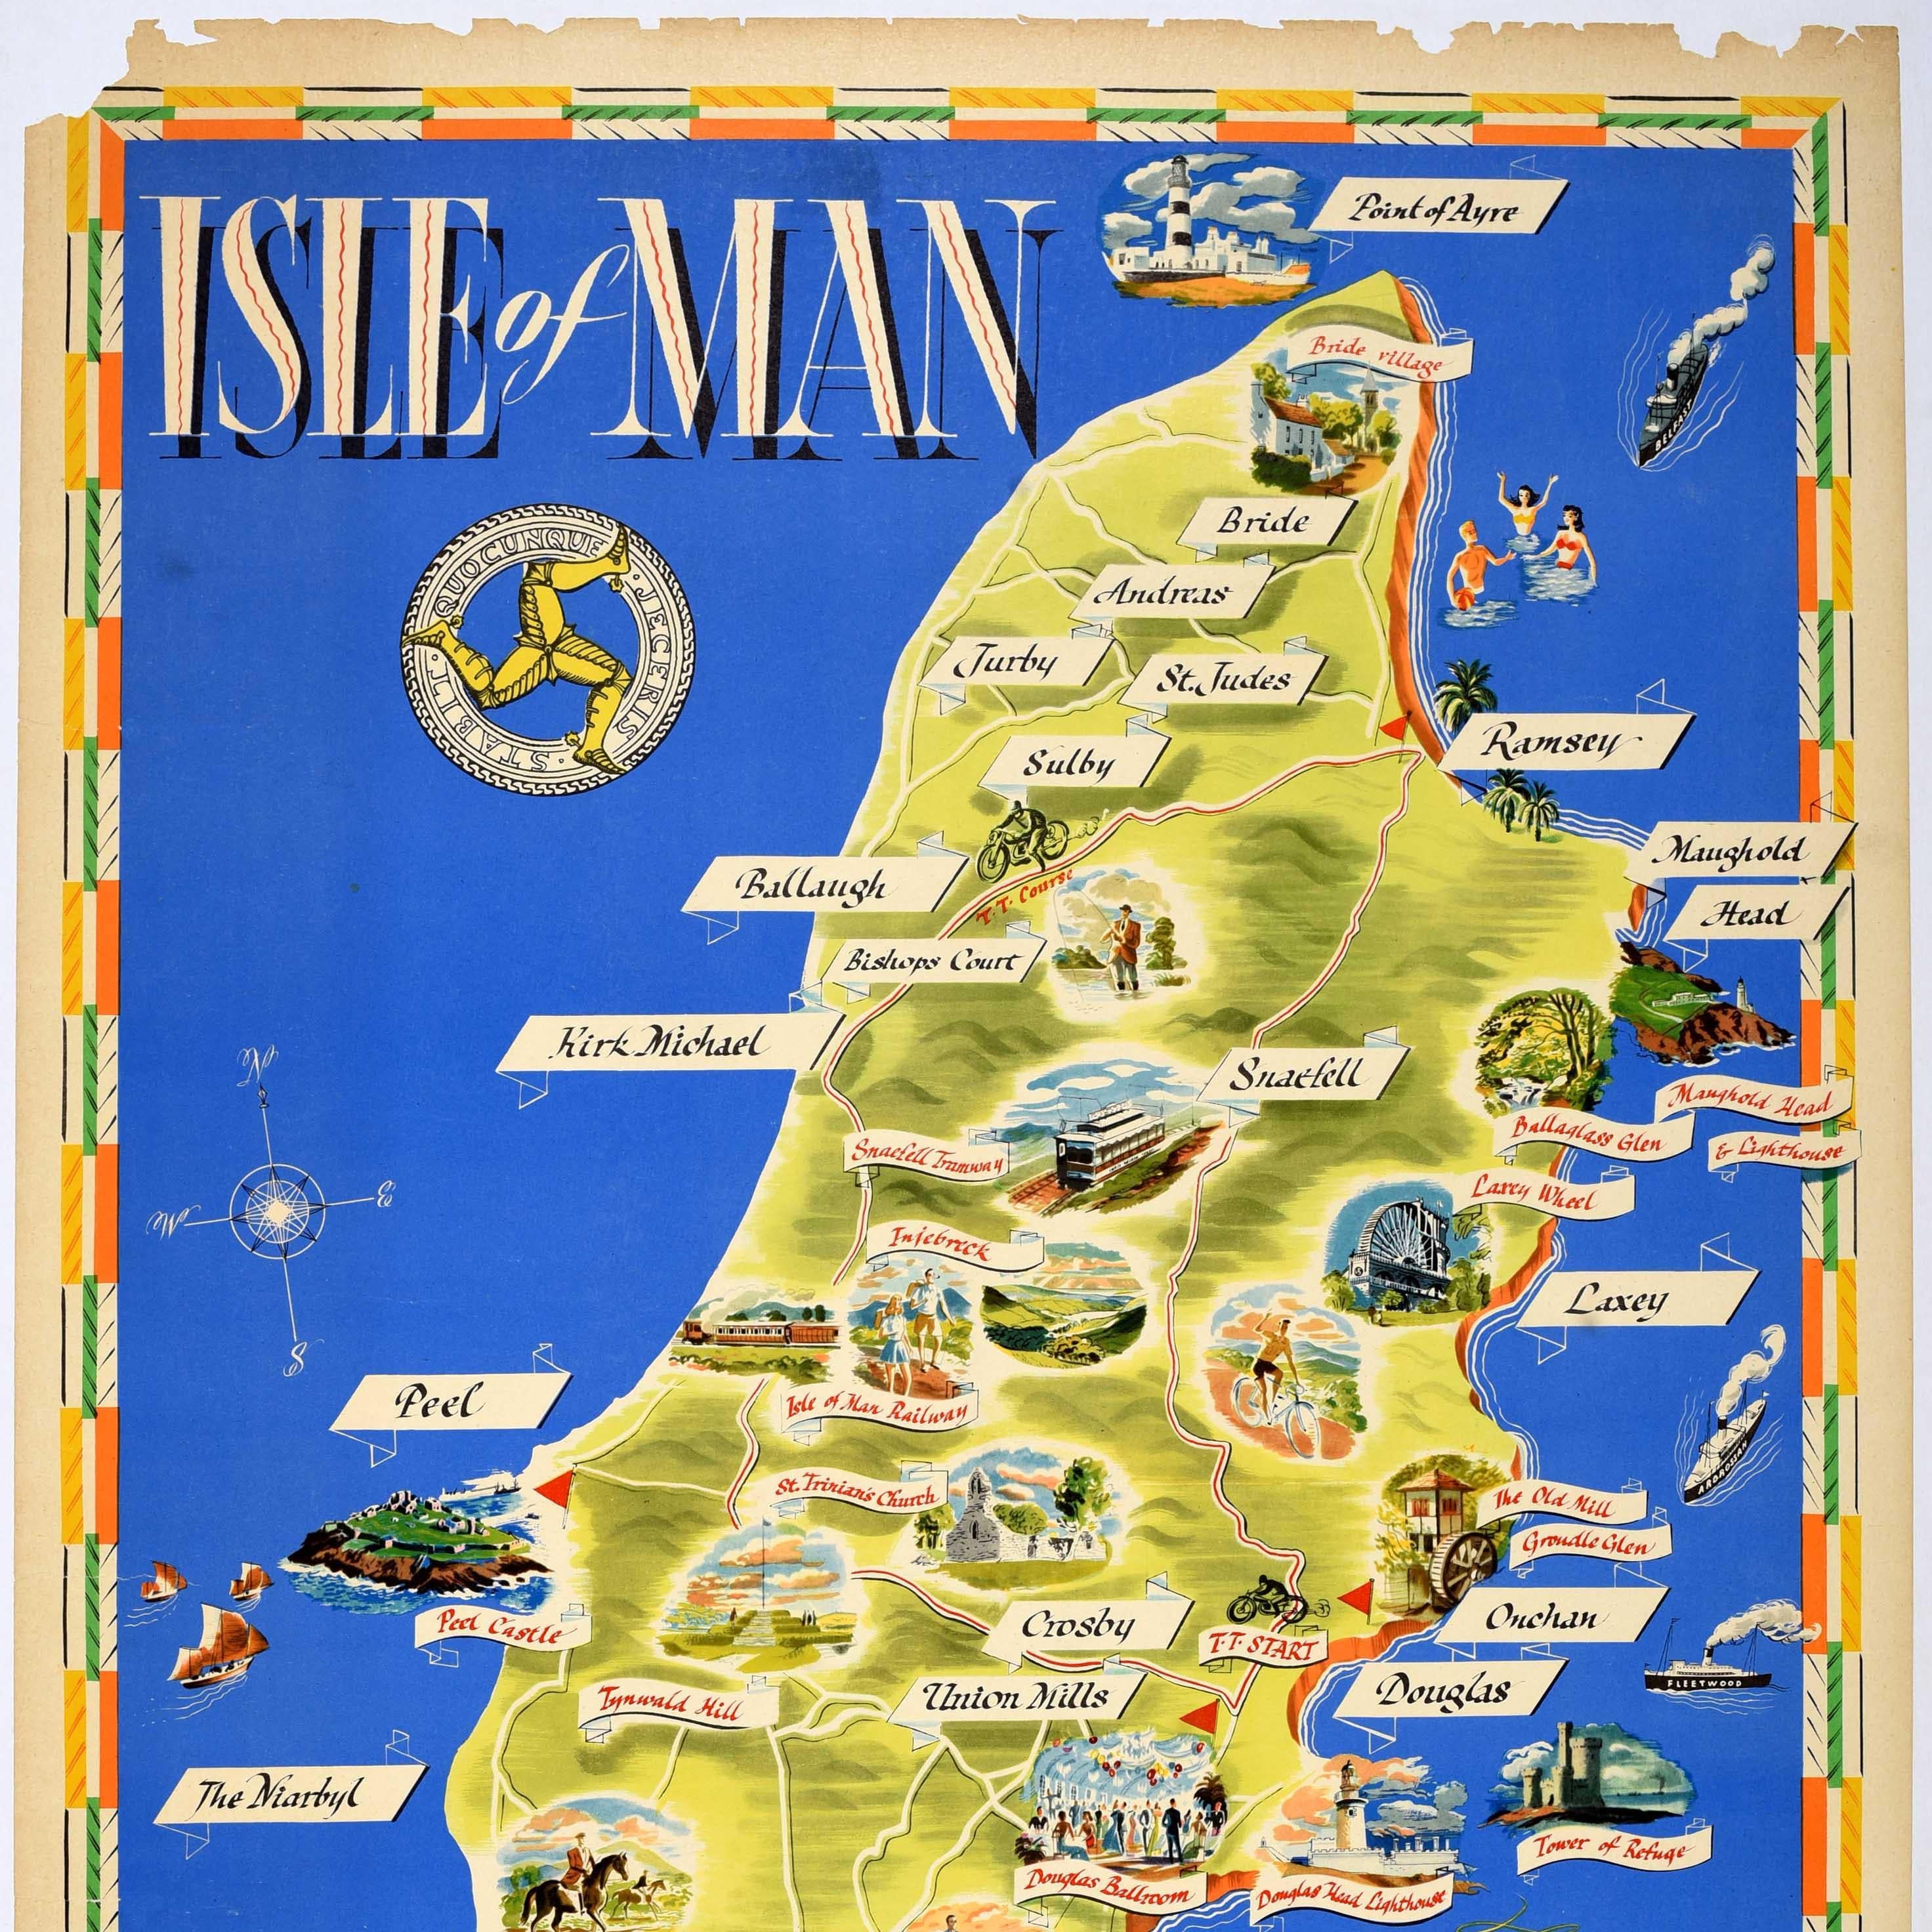 Original vintage travel map poster for the Isle of Man issued by British Railways in conjunction with Isle of Man Publicity Board featuring a pictorial map annotated with names of towns and illustrations of local points of interest including the